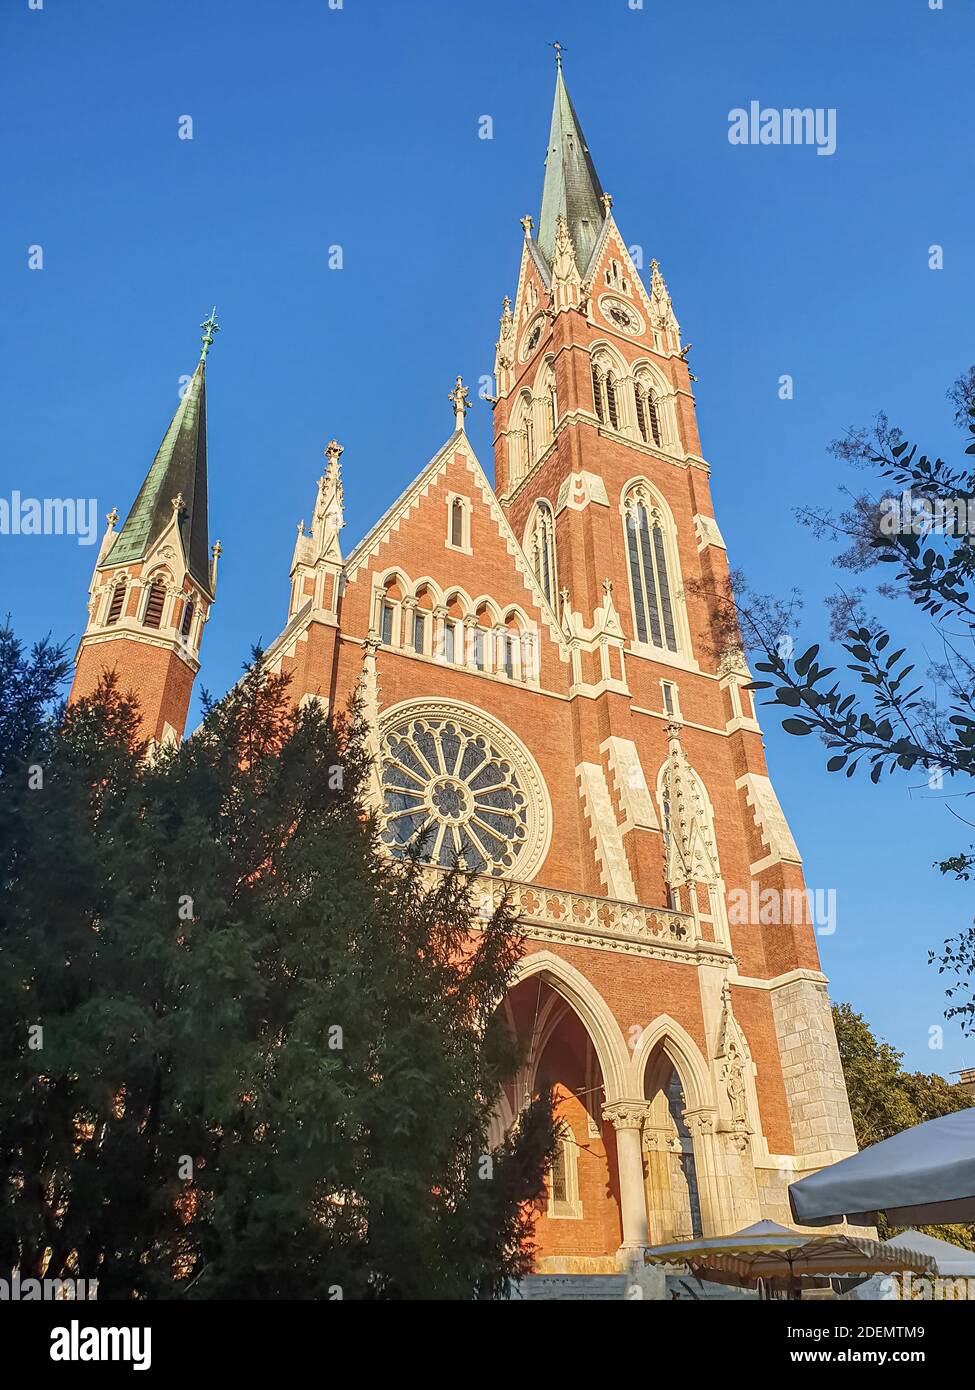 Church of the Heart of Jesus against the blue sky in Graz, Austria. Stock Photo